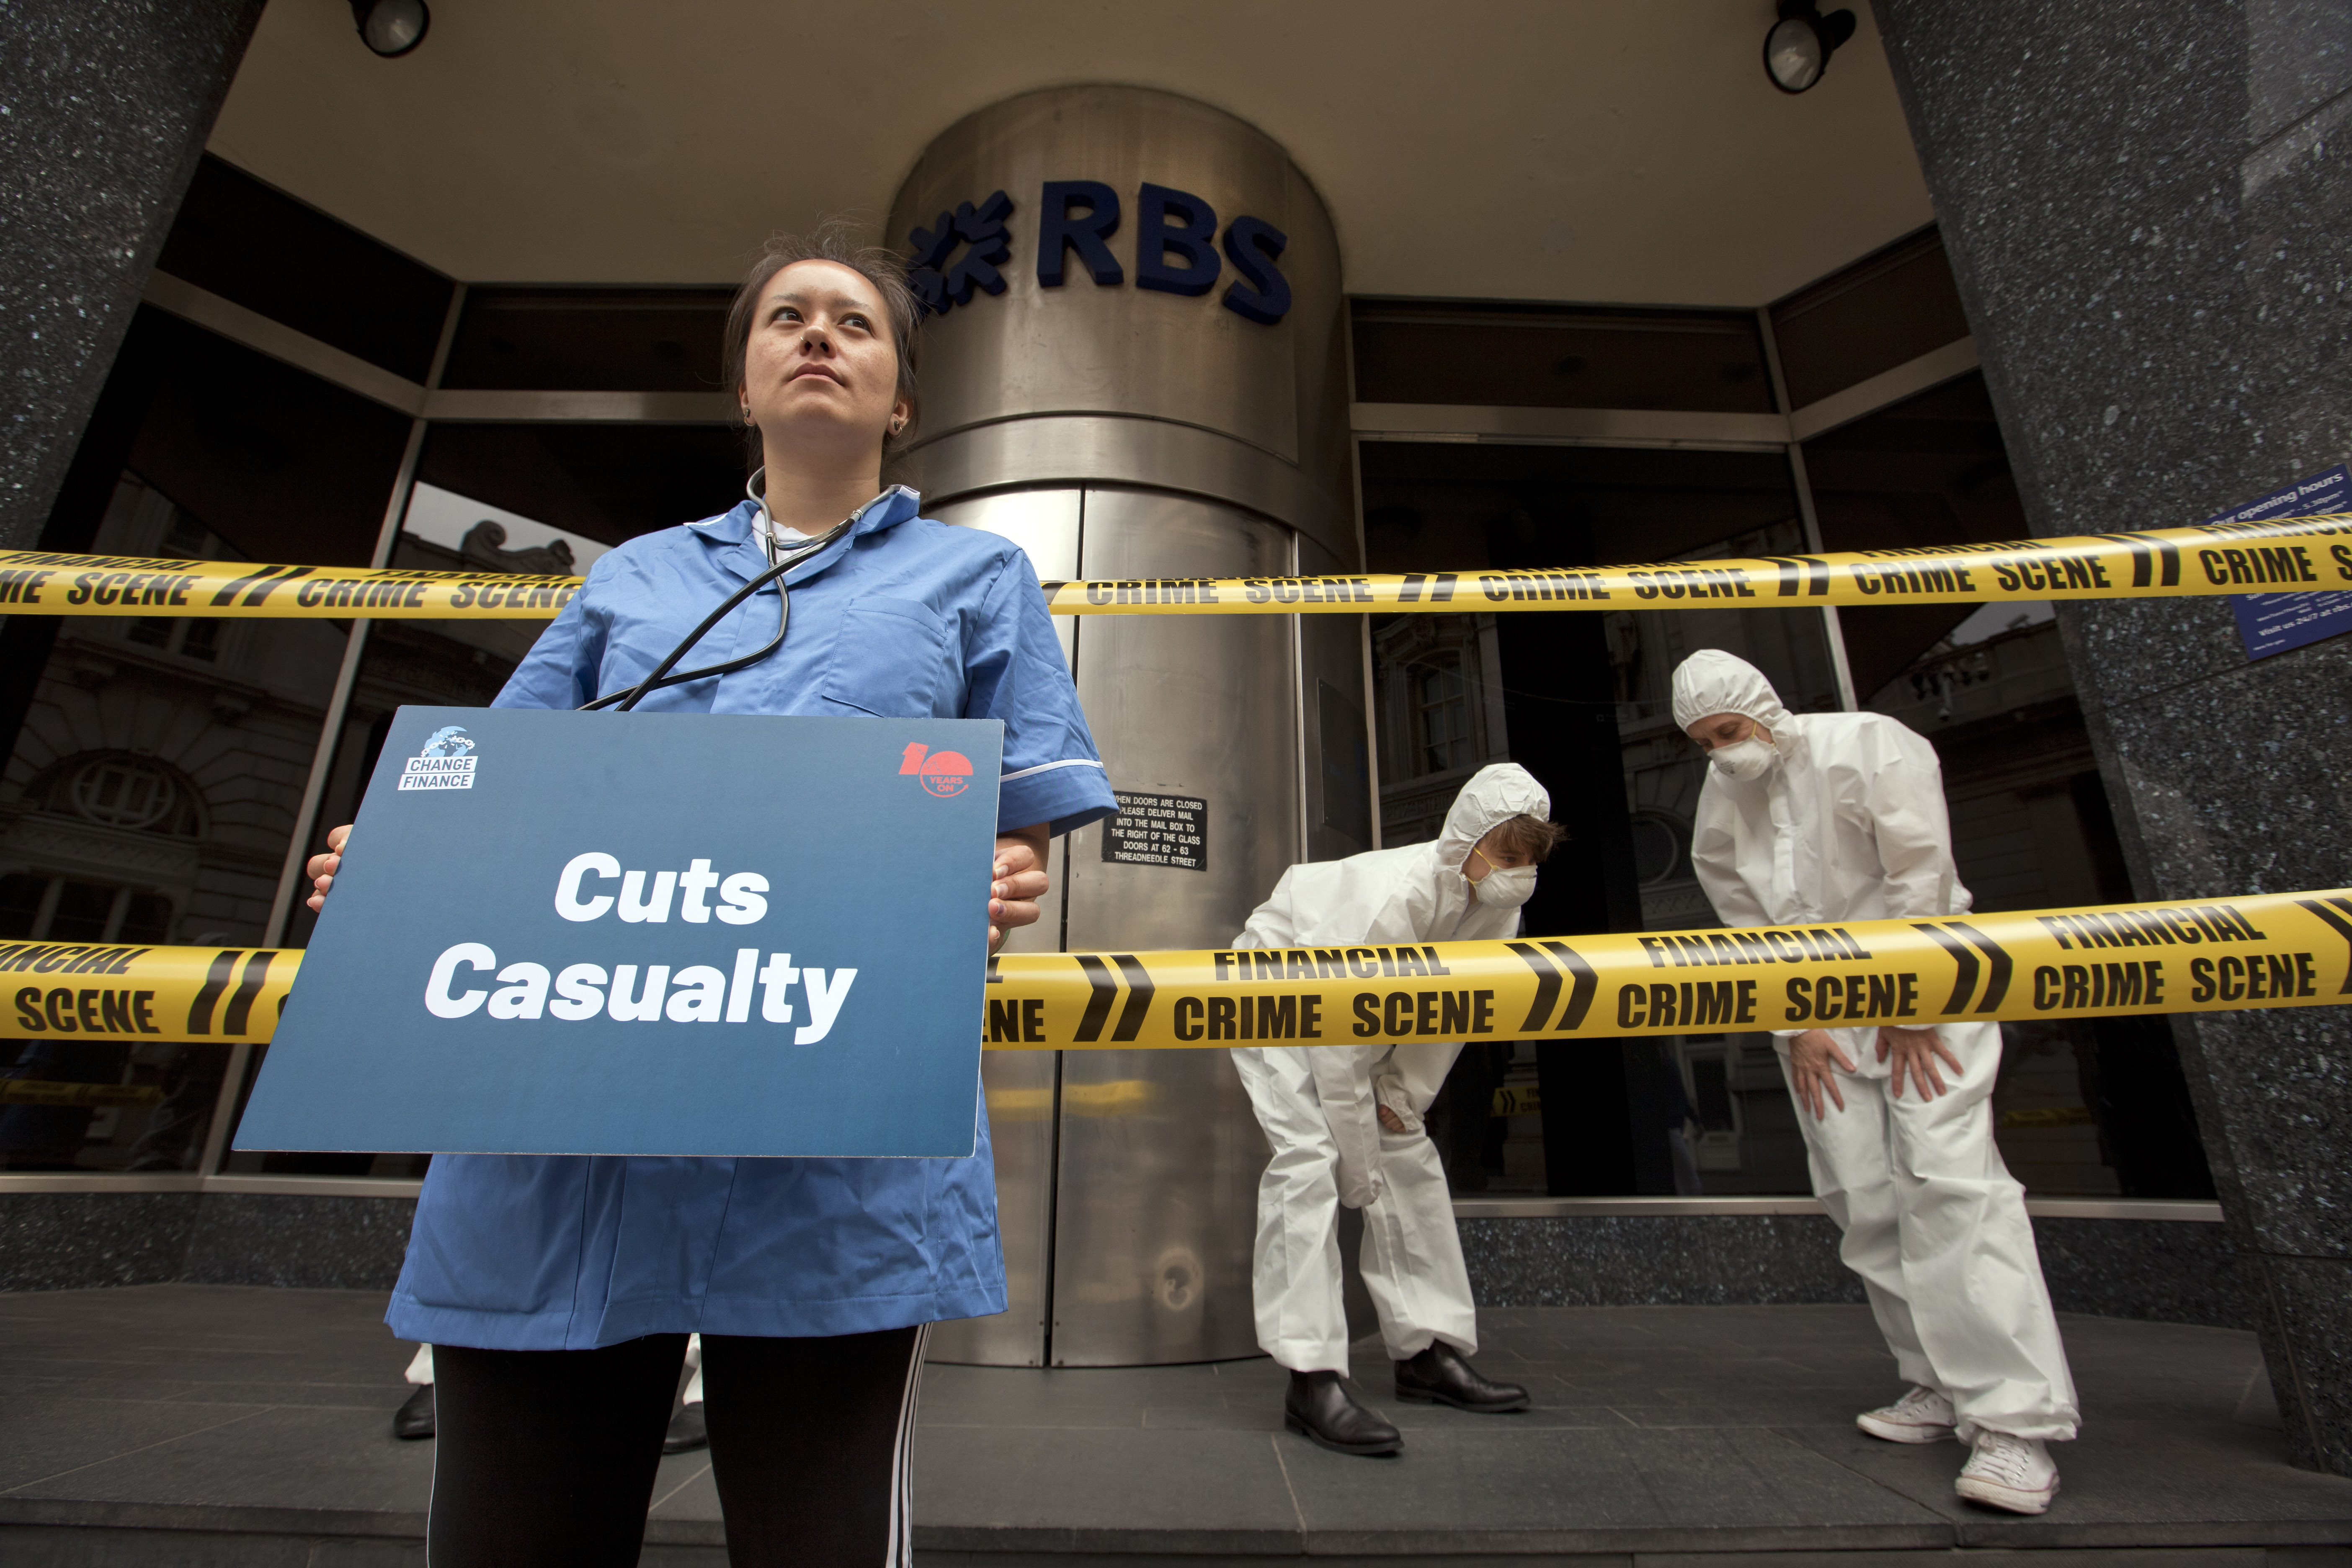 10 Years On campaigners declare RBS a financial crime scene